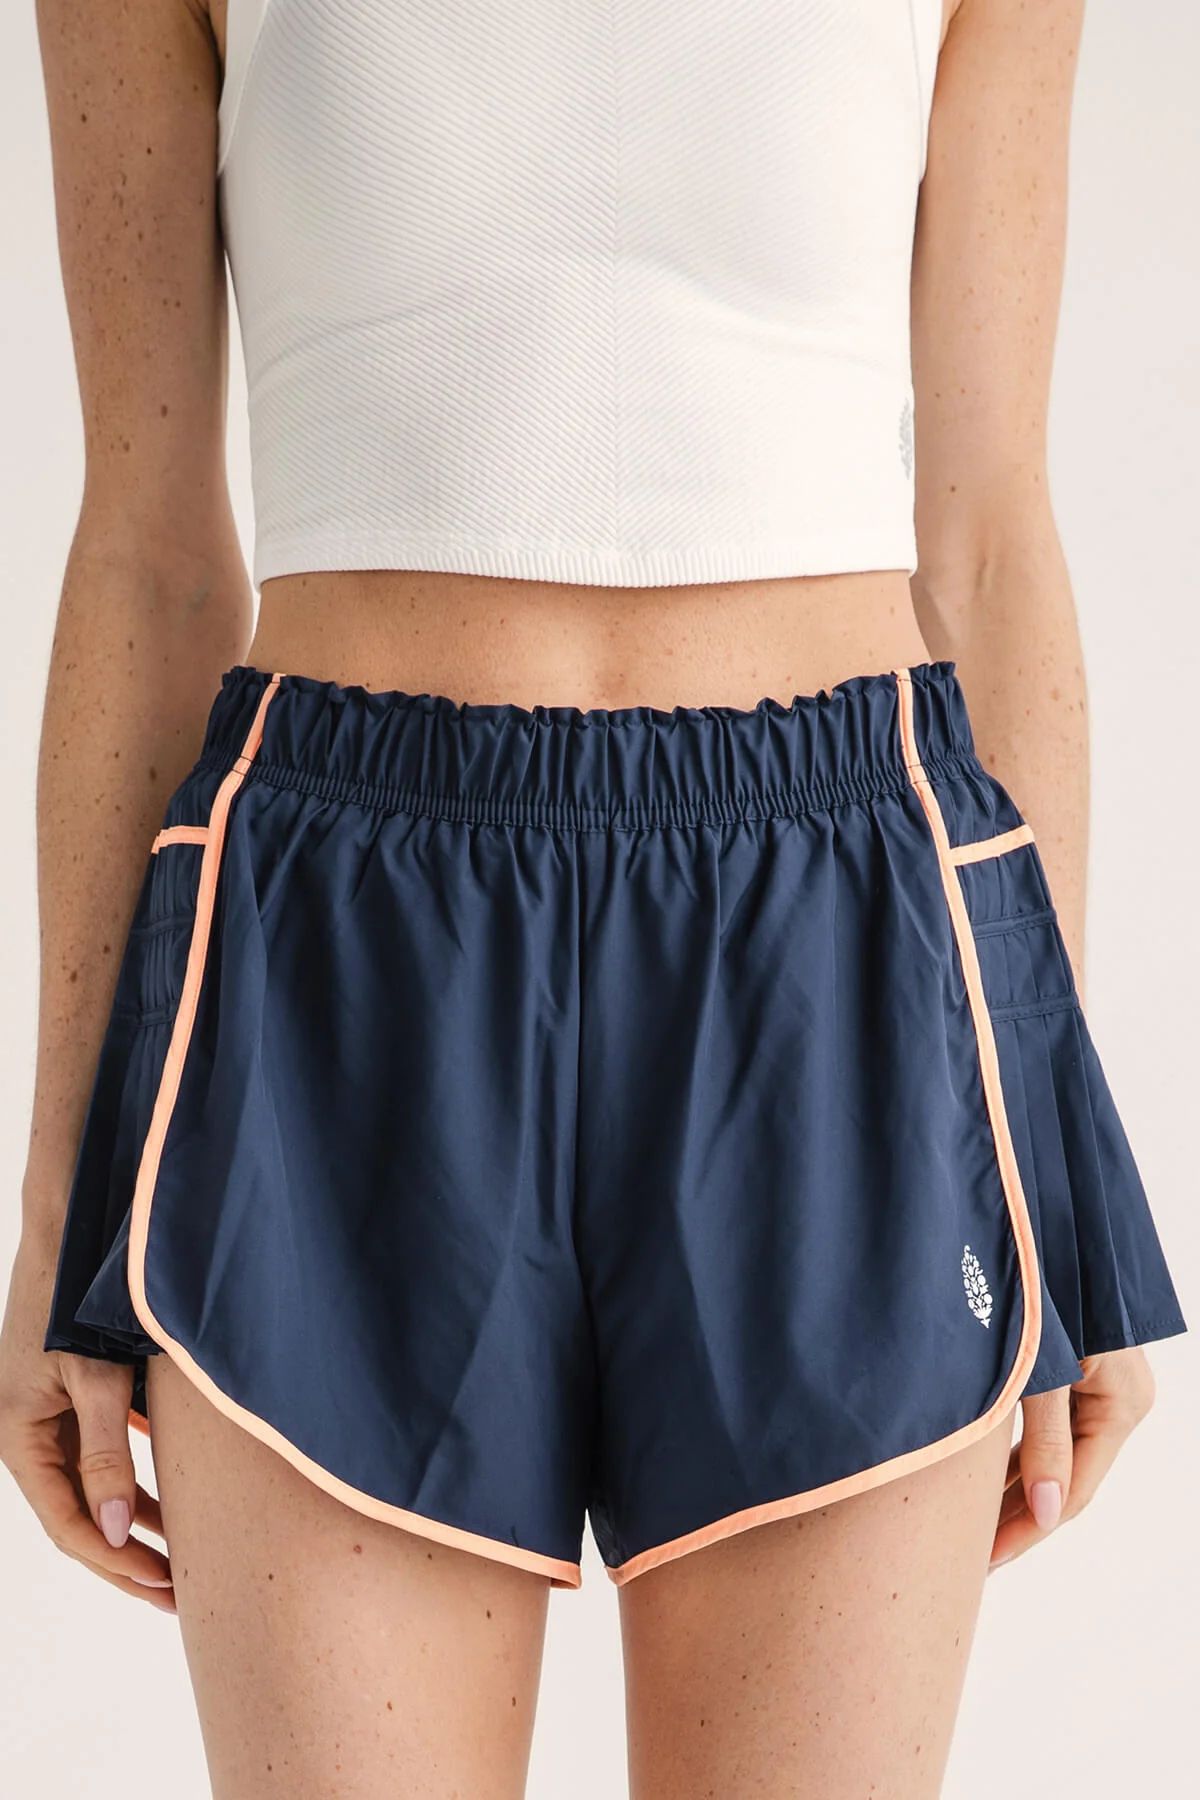 FP Movement Easy Tiger Shorts | Social Threads